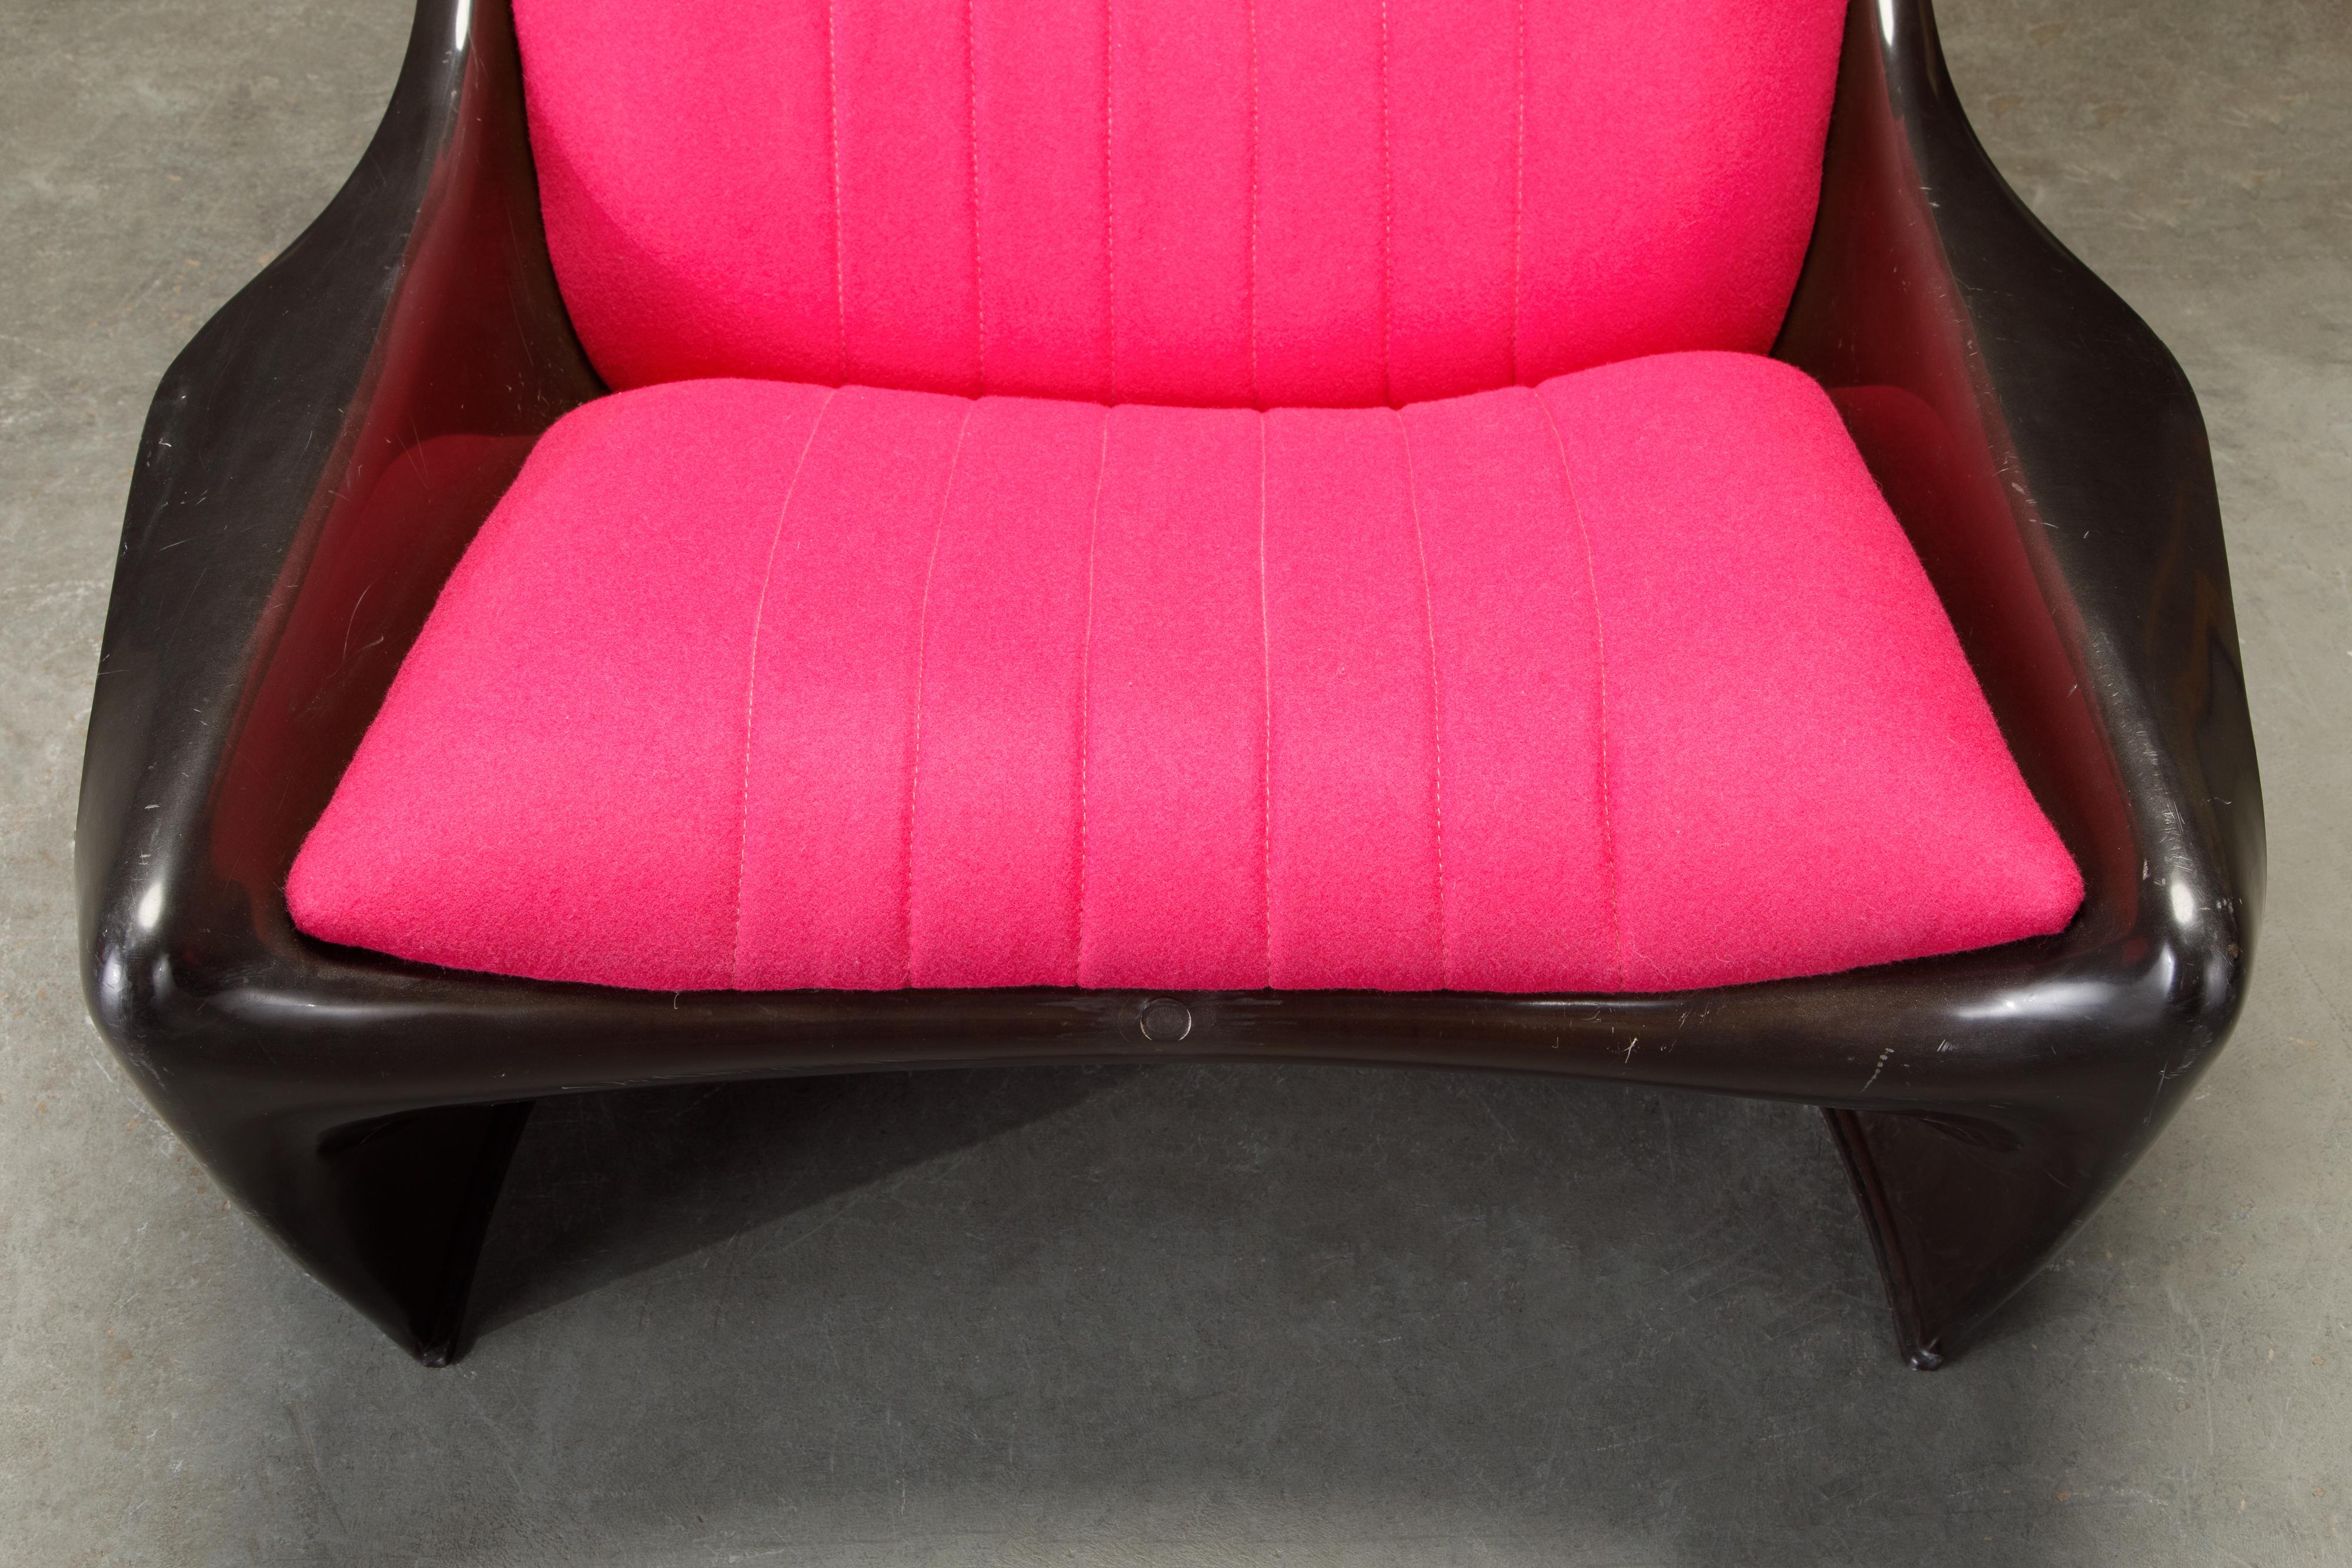 'President' Fiberglass Lounge Chairs by Steen Ostergaard for Cado, 1968, Signed  For Sale 5